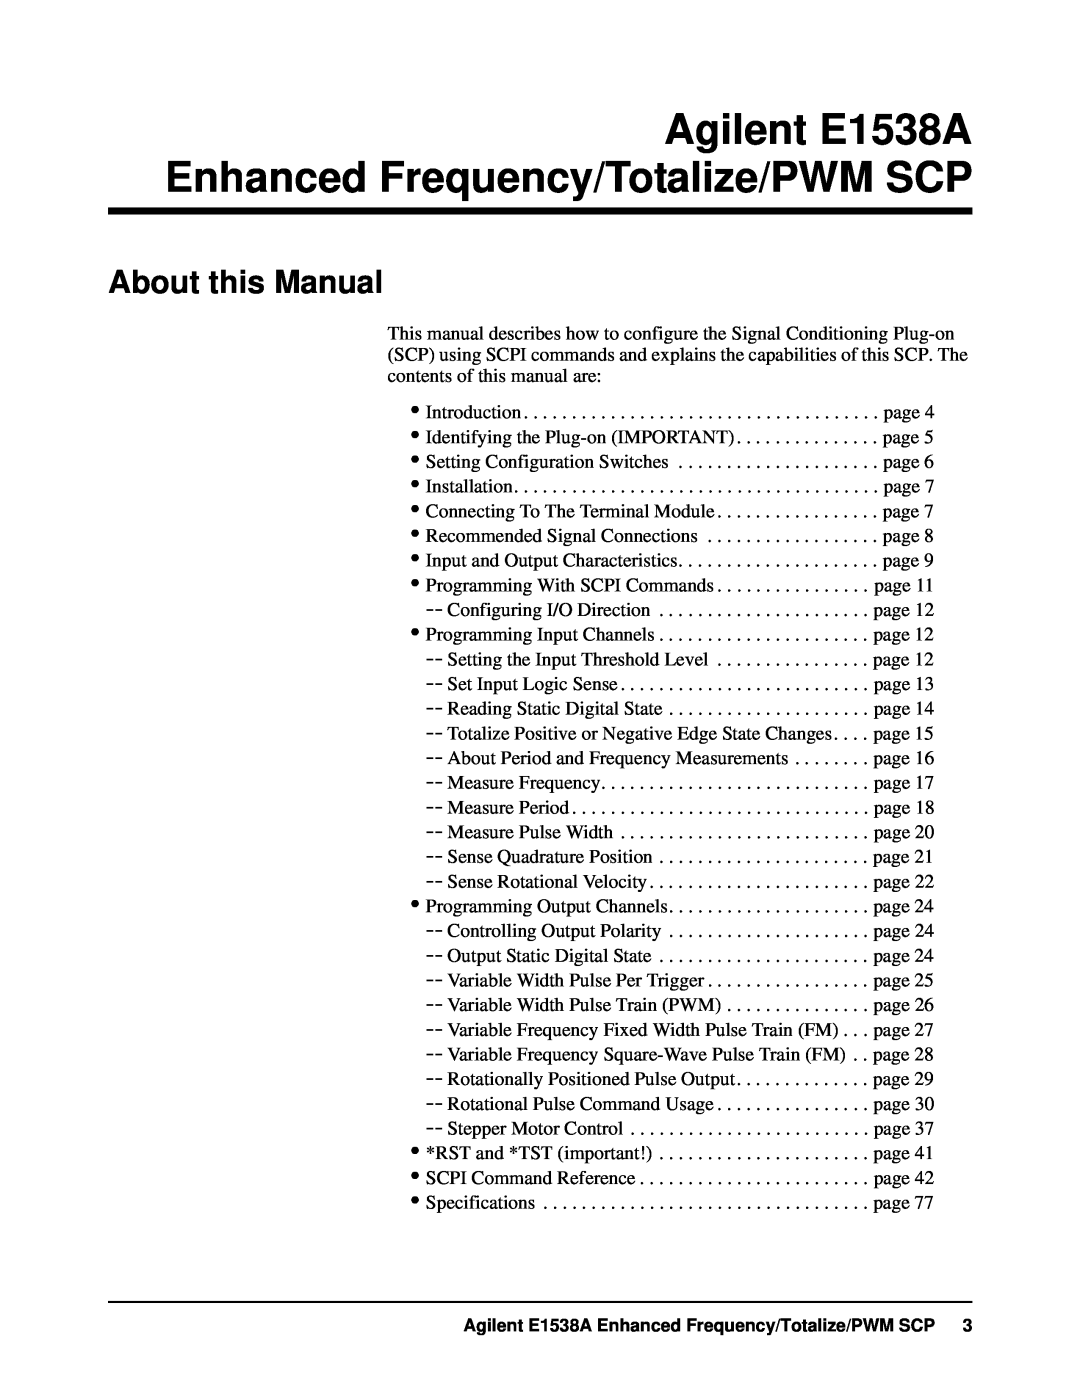 VXI VT1538A user manual About this Manual, Agilent E1538A Enhanced Frequency/Totalize/PWM SCP 